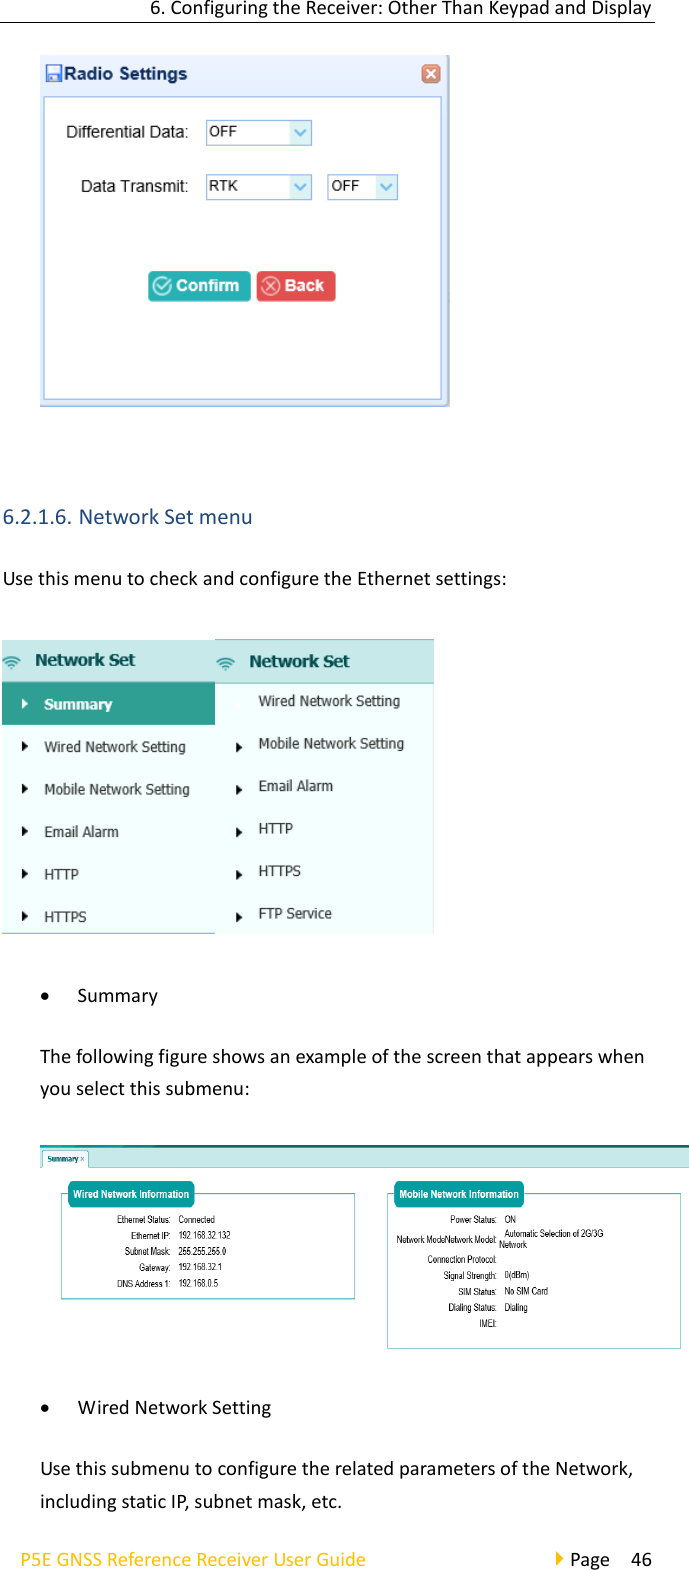 6. Configuring the Receiver: Other Than Keypad and Display P5E GNSS Reference Receiver User Guide                                     Page  46   6.2.1.6. Network Set menu Use this menu to check and configure the Ethernet settings:  • Summary The following figure shows an example of the screen that appears when you select this submenu:  • Wired Network Setting Use this submenu to configure the related parameters of the Network, including static IP, subnet mask, etc.   